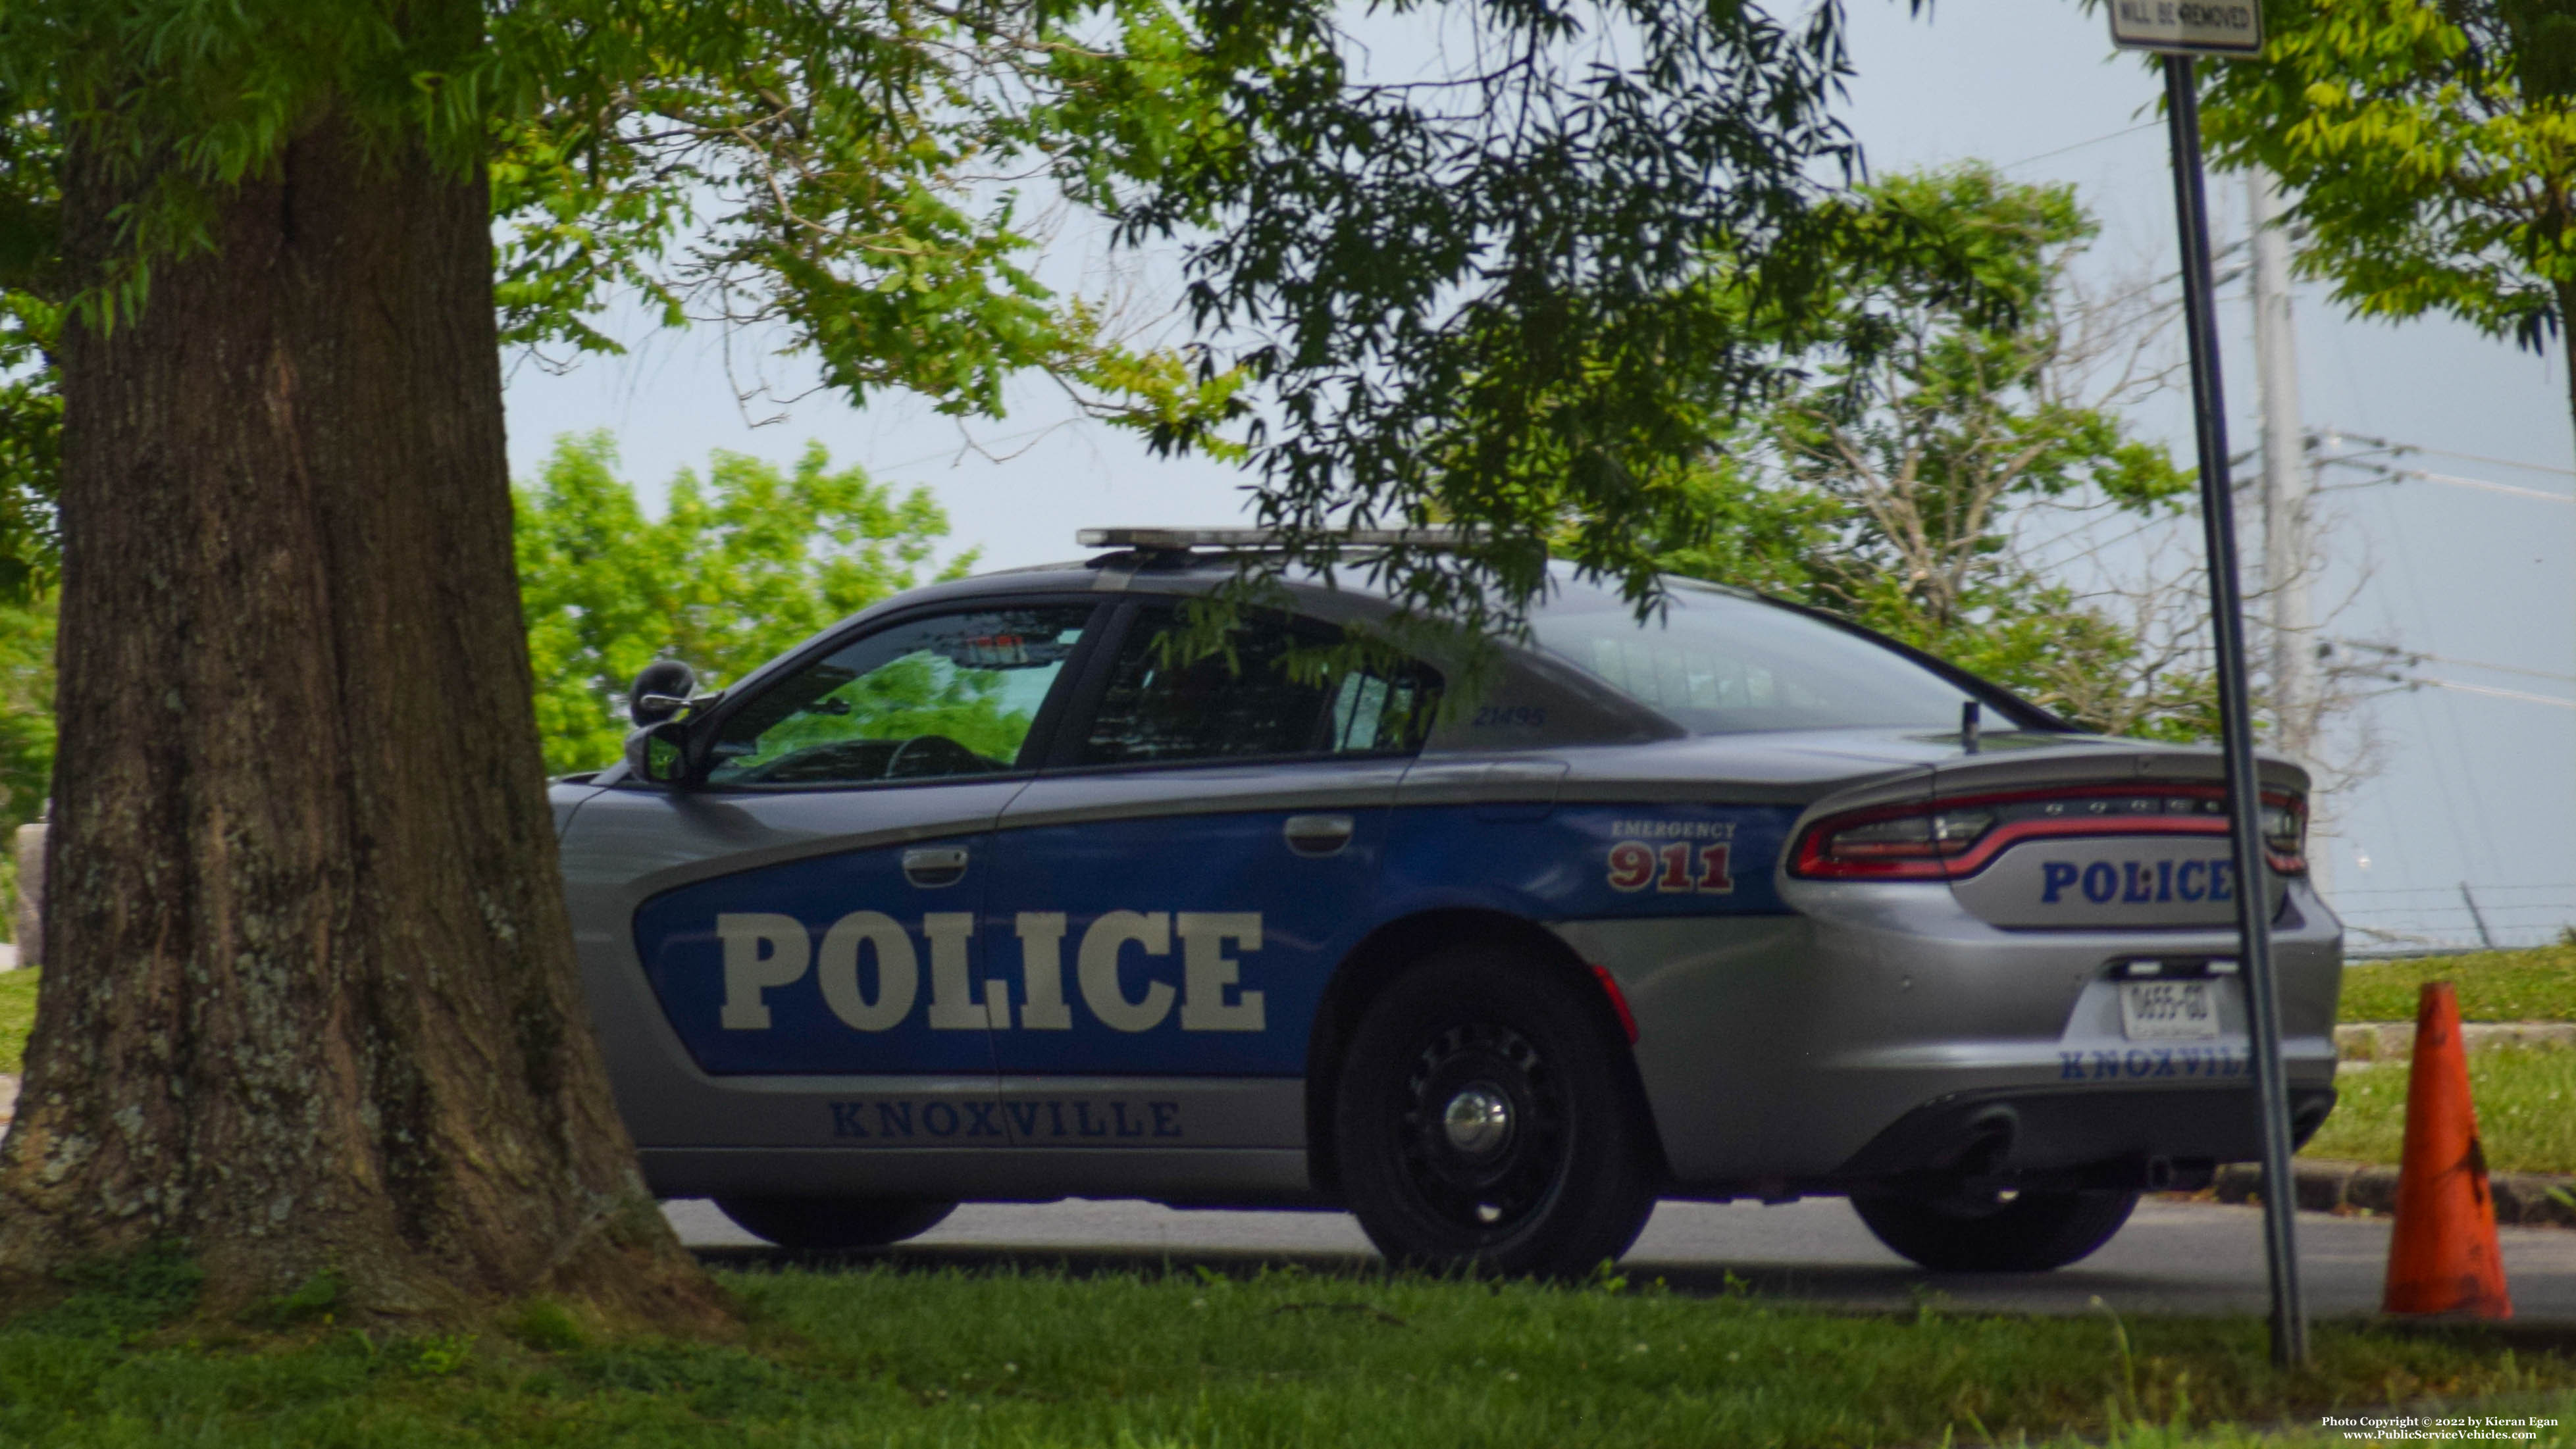 A photo  of Knoxville Police
            Cruiser 21495, a 2015-2019 Dodge Charger             taken by Kieran Egan